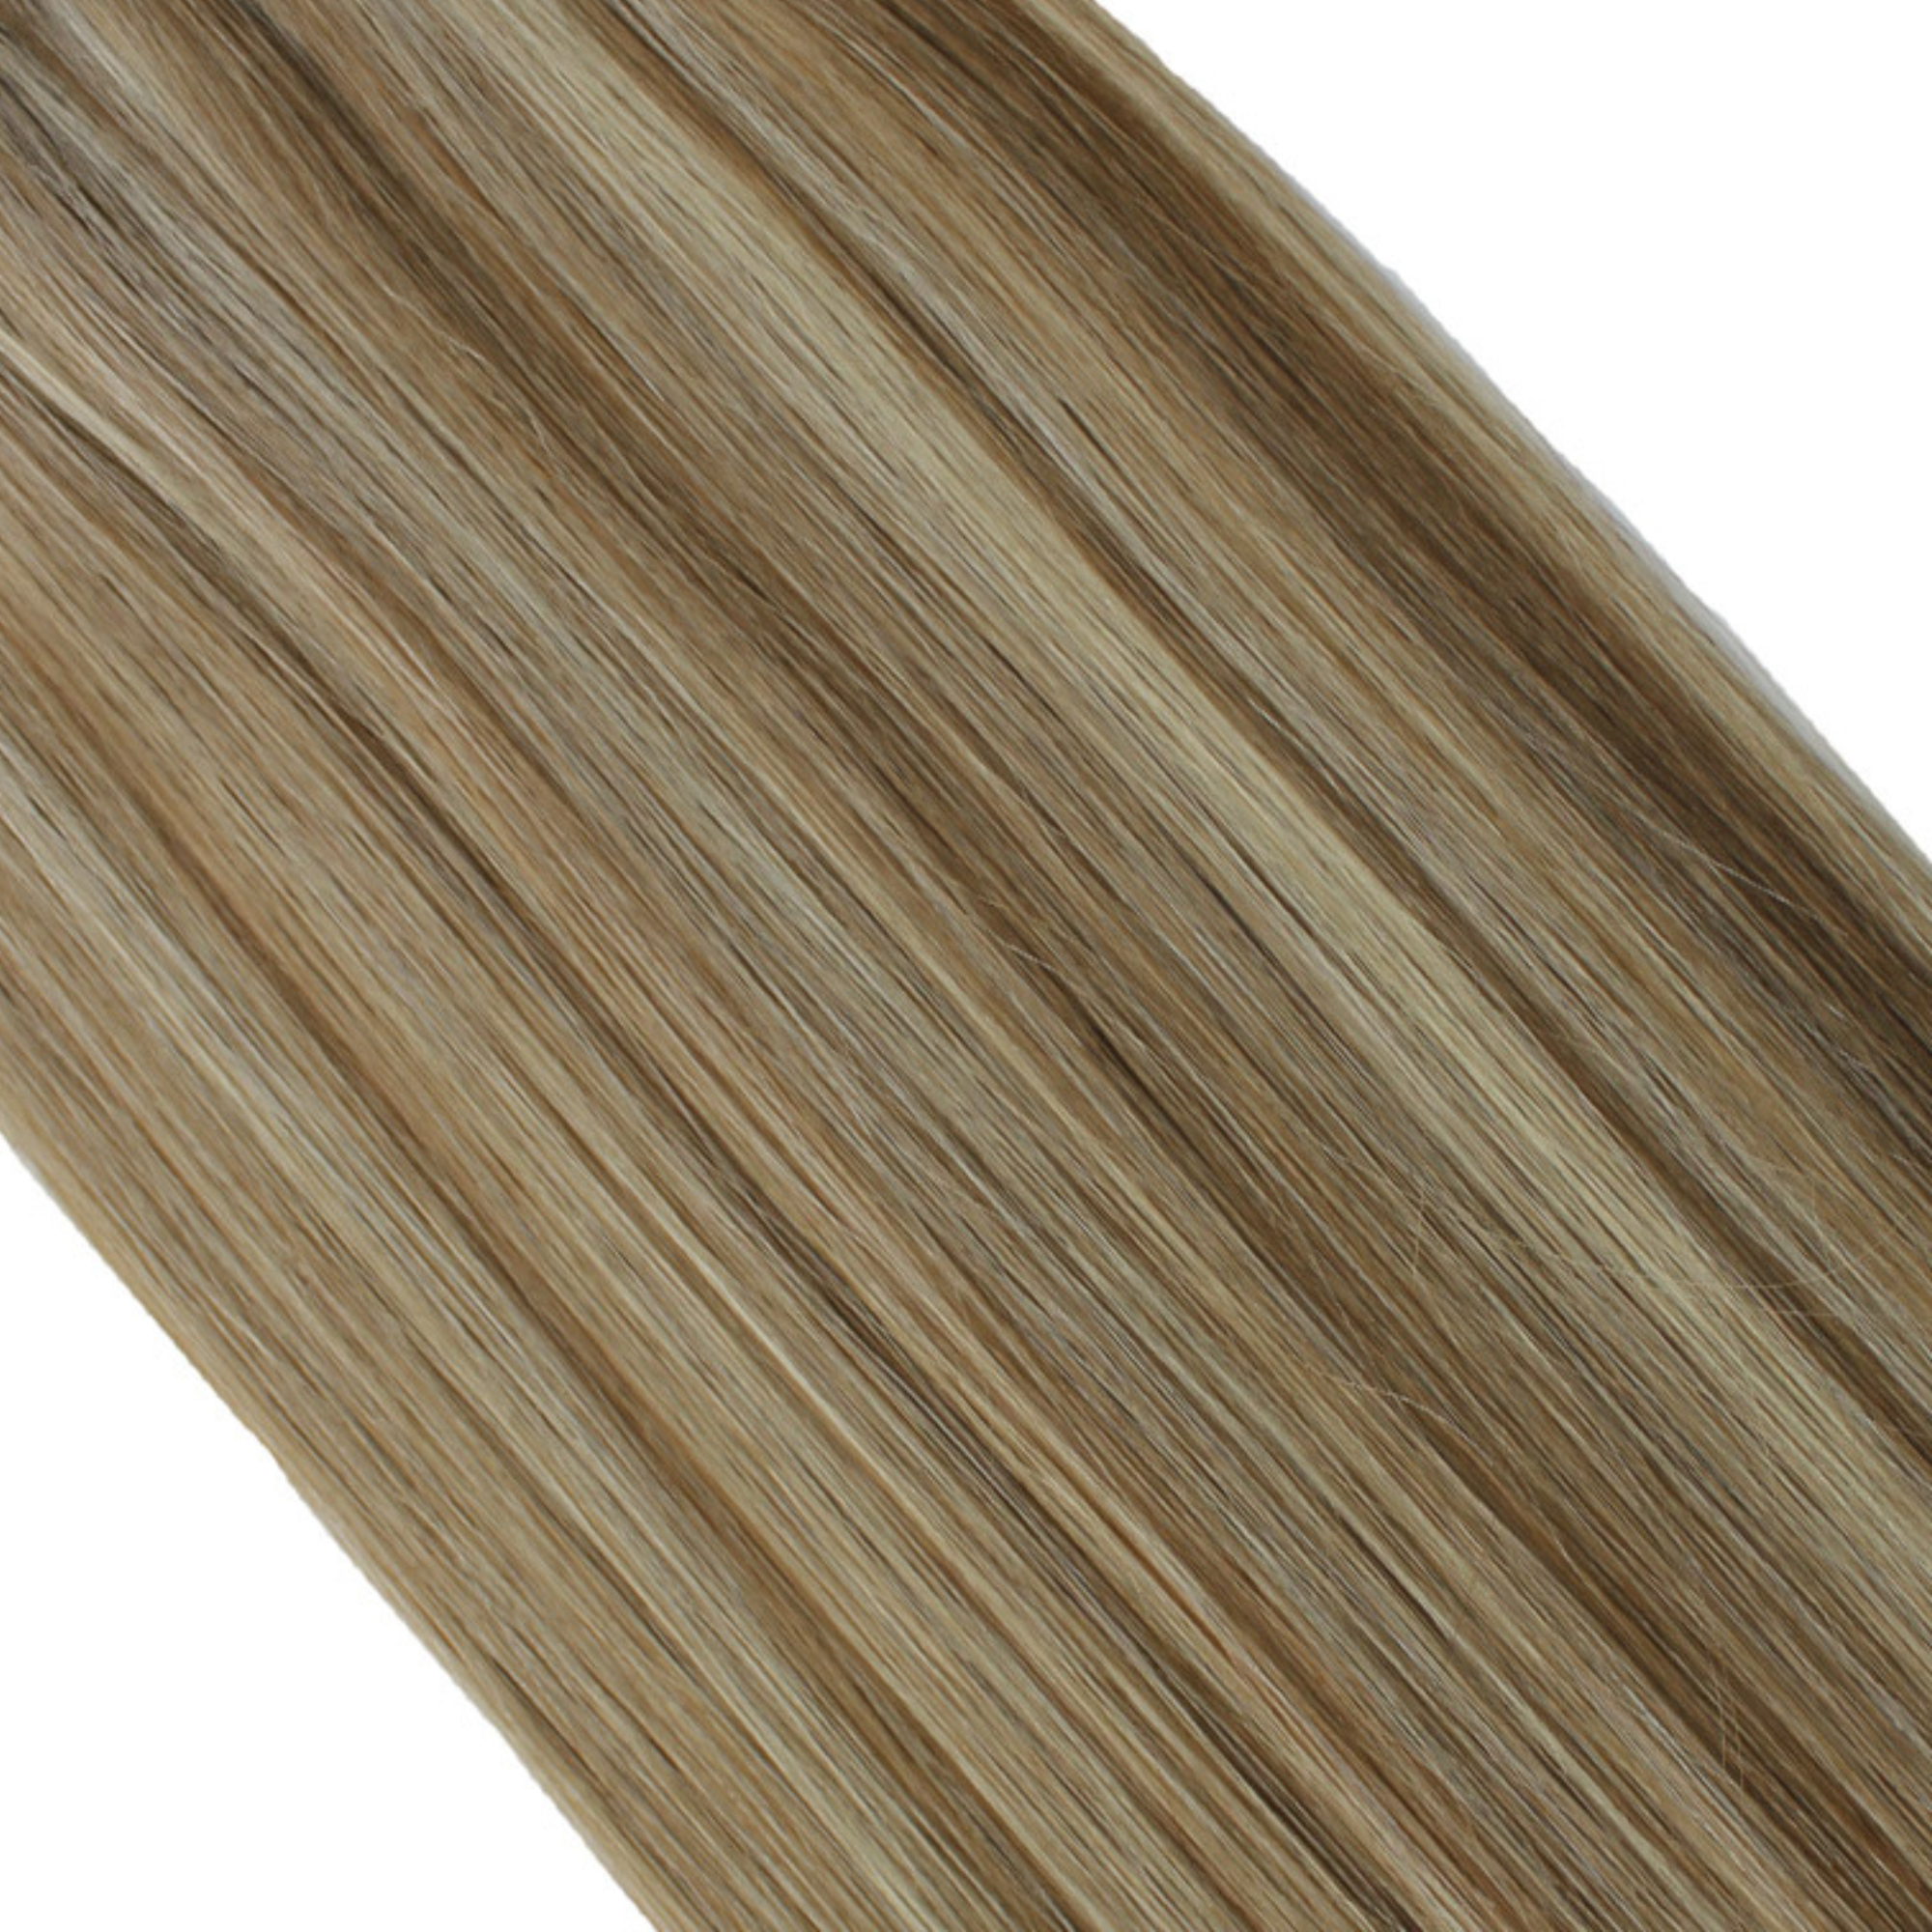 "hair rehab london 22" weft hair extensions shade swatch titled supermodel style"